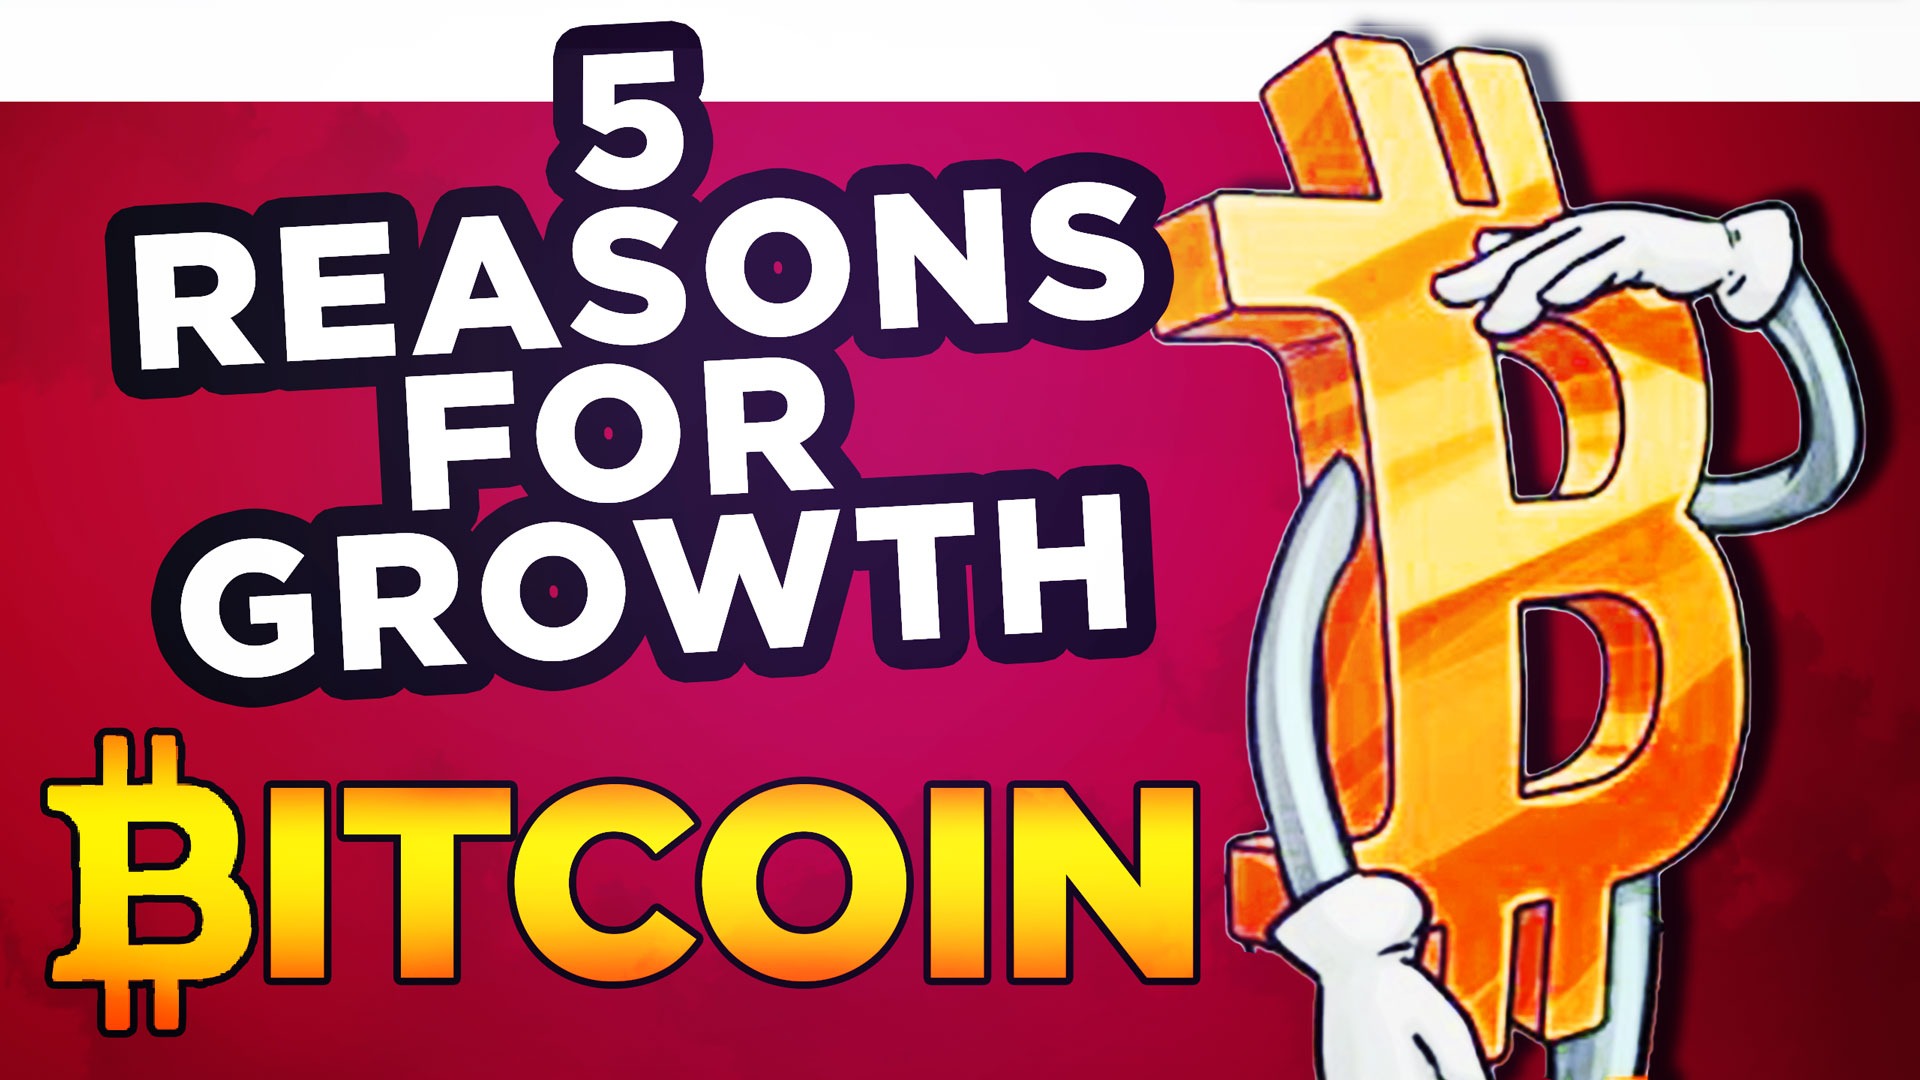 Bitcoin will up again. Five reasons for growing. Outlook for the 2019